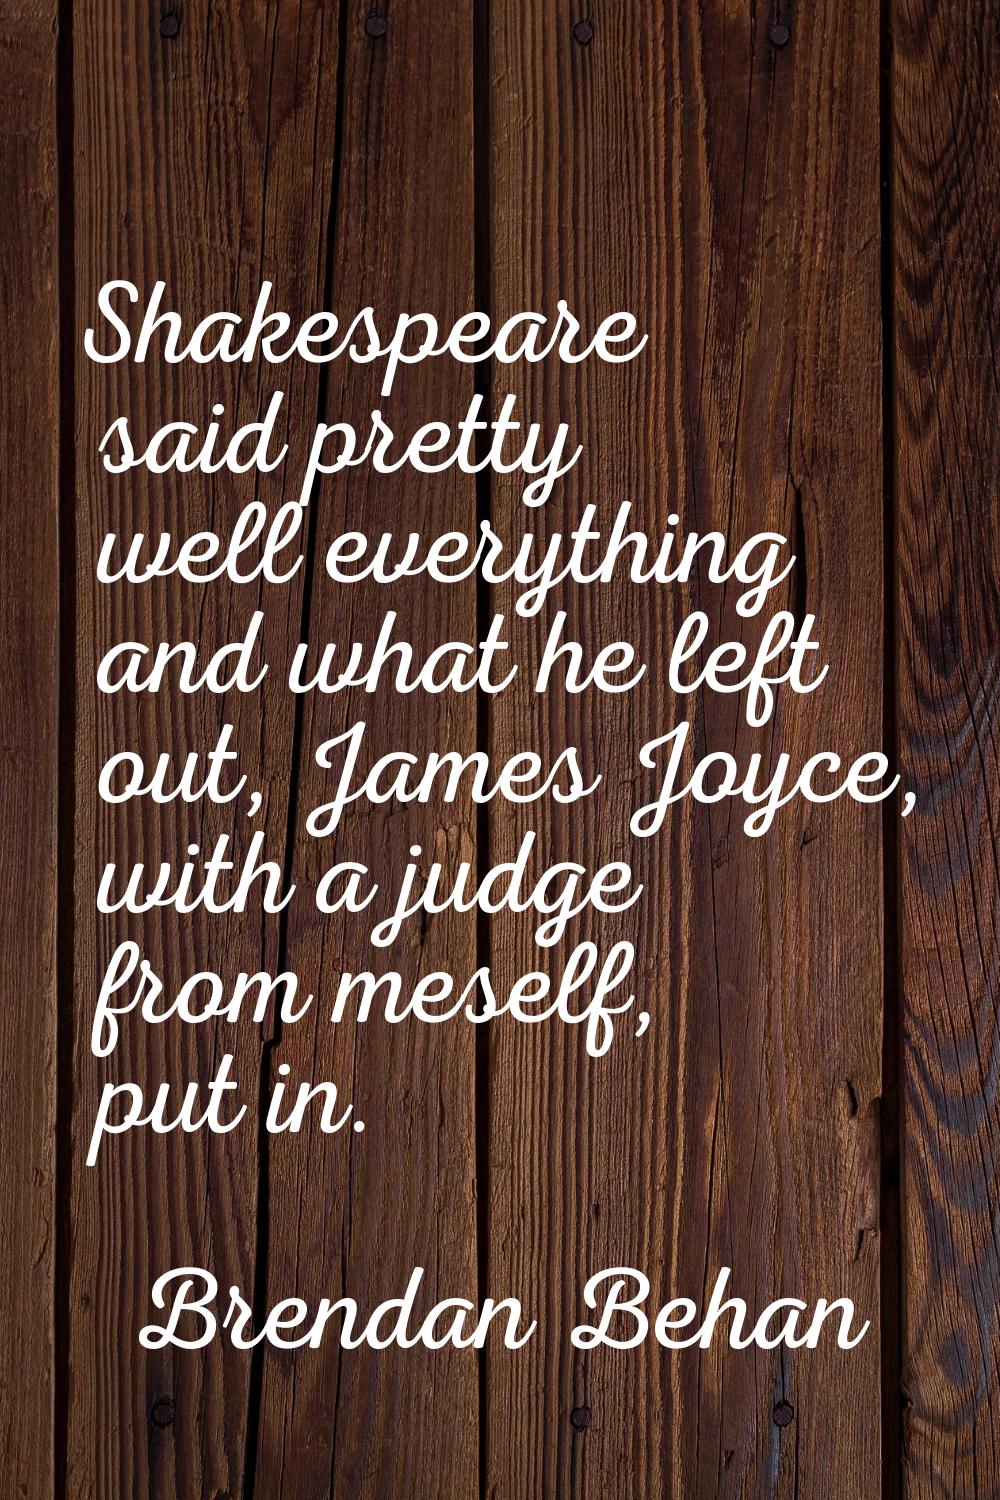 Shakespeare said pretty well everything and what he left out, James Joyce, with a judge from meself